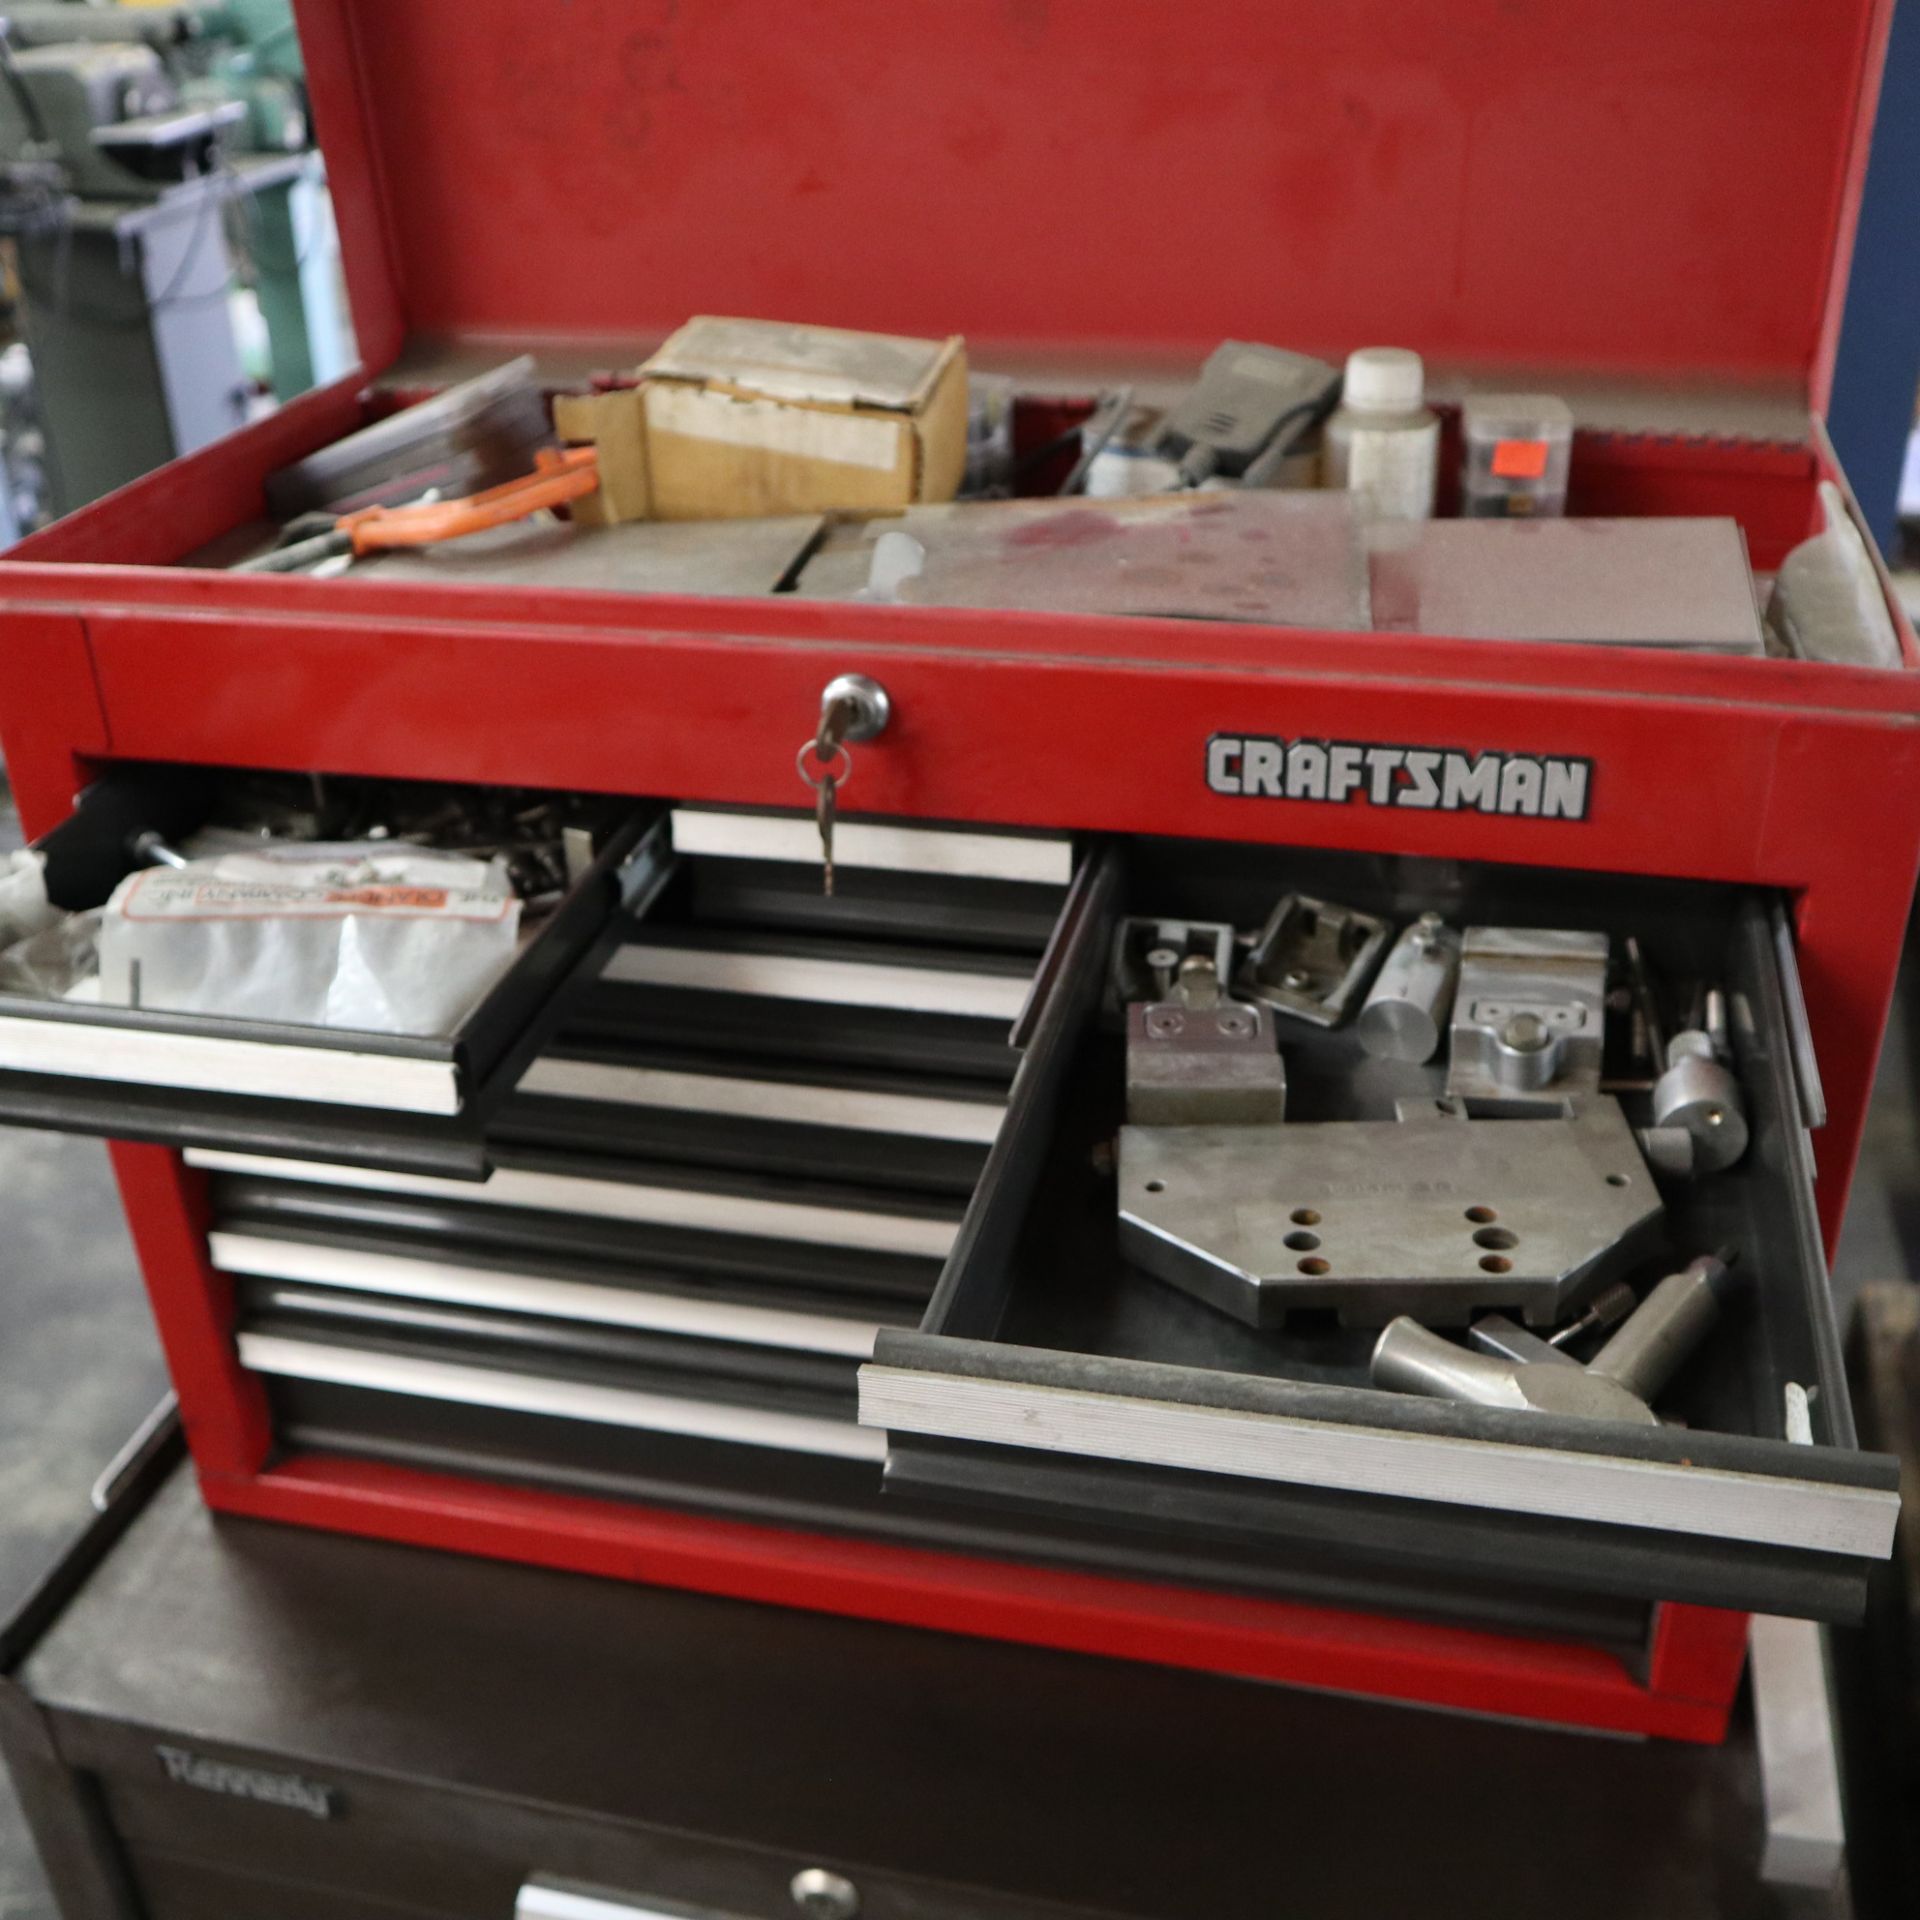 LOT TO INCLUDE: (1) CRAFTSMAN TOOLBOX 9 DRAWER WITH MISC. WRENCHES, SOCKETS, AND TOOLING - Image 4 of 14